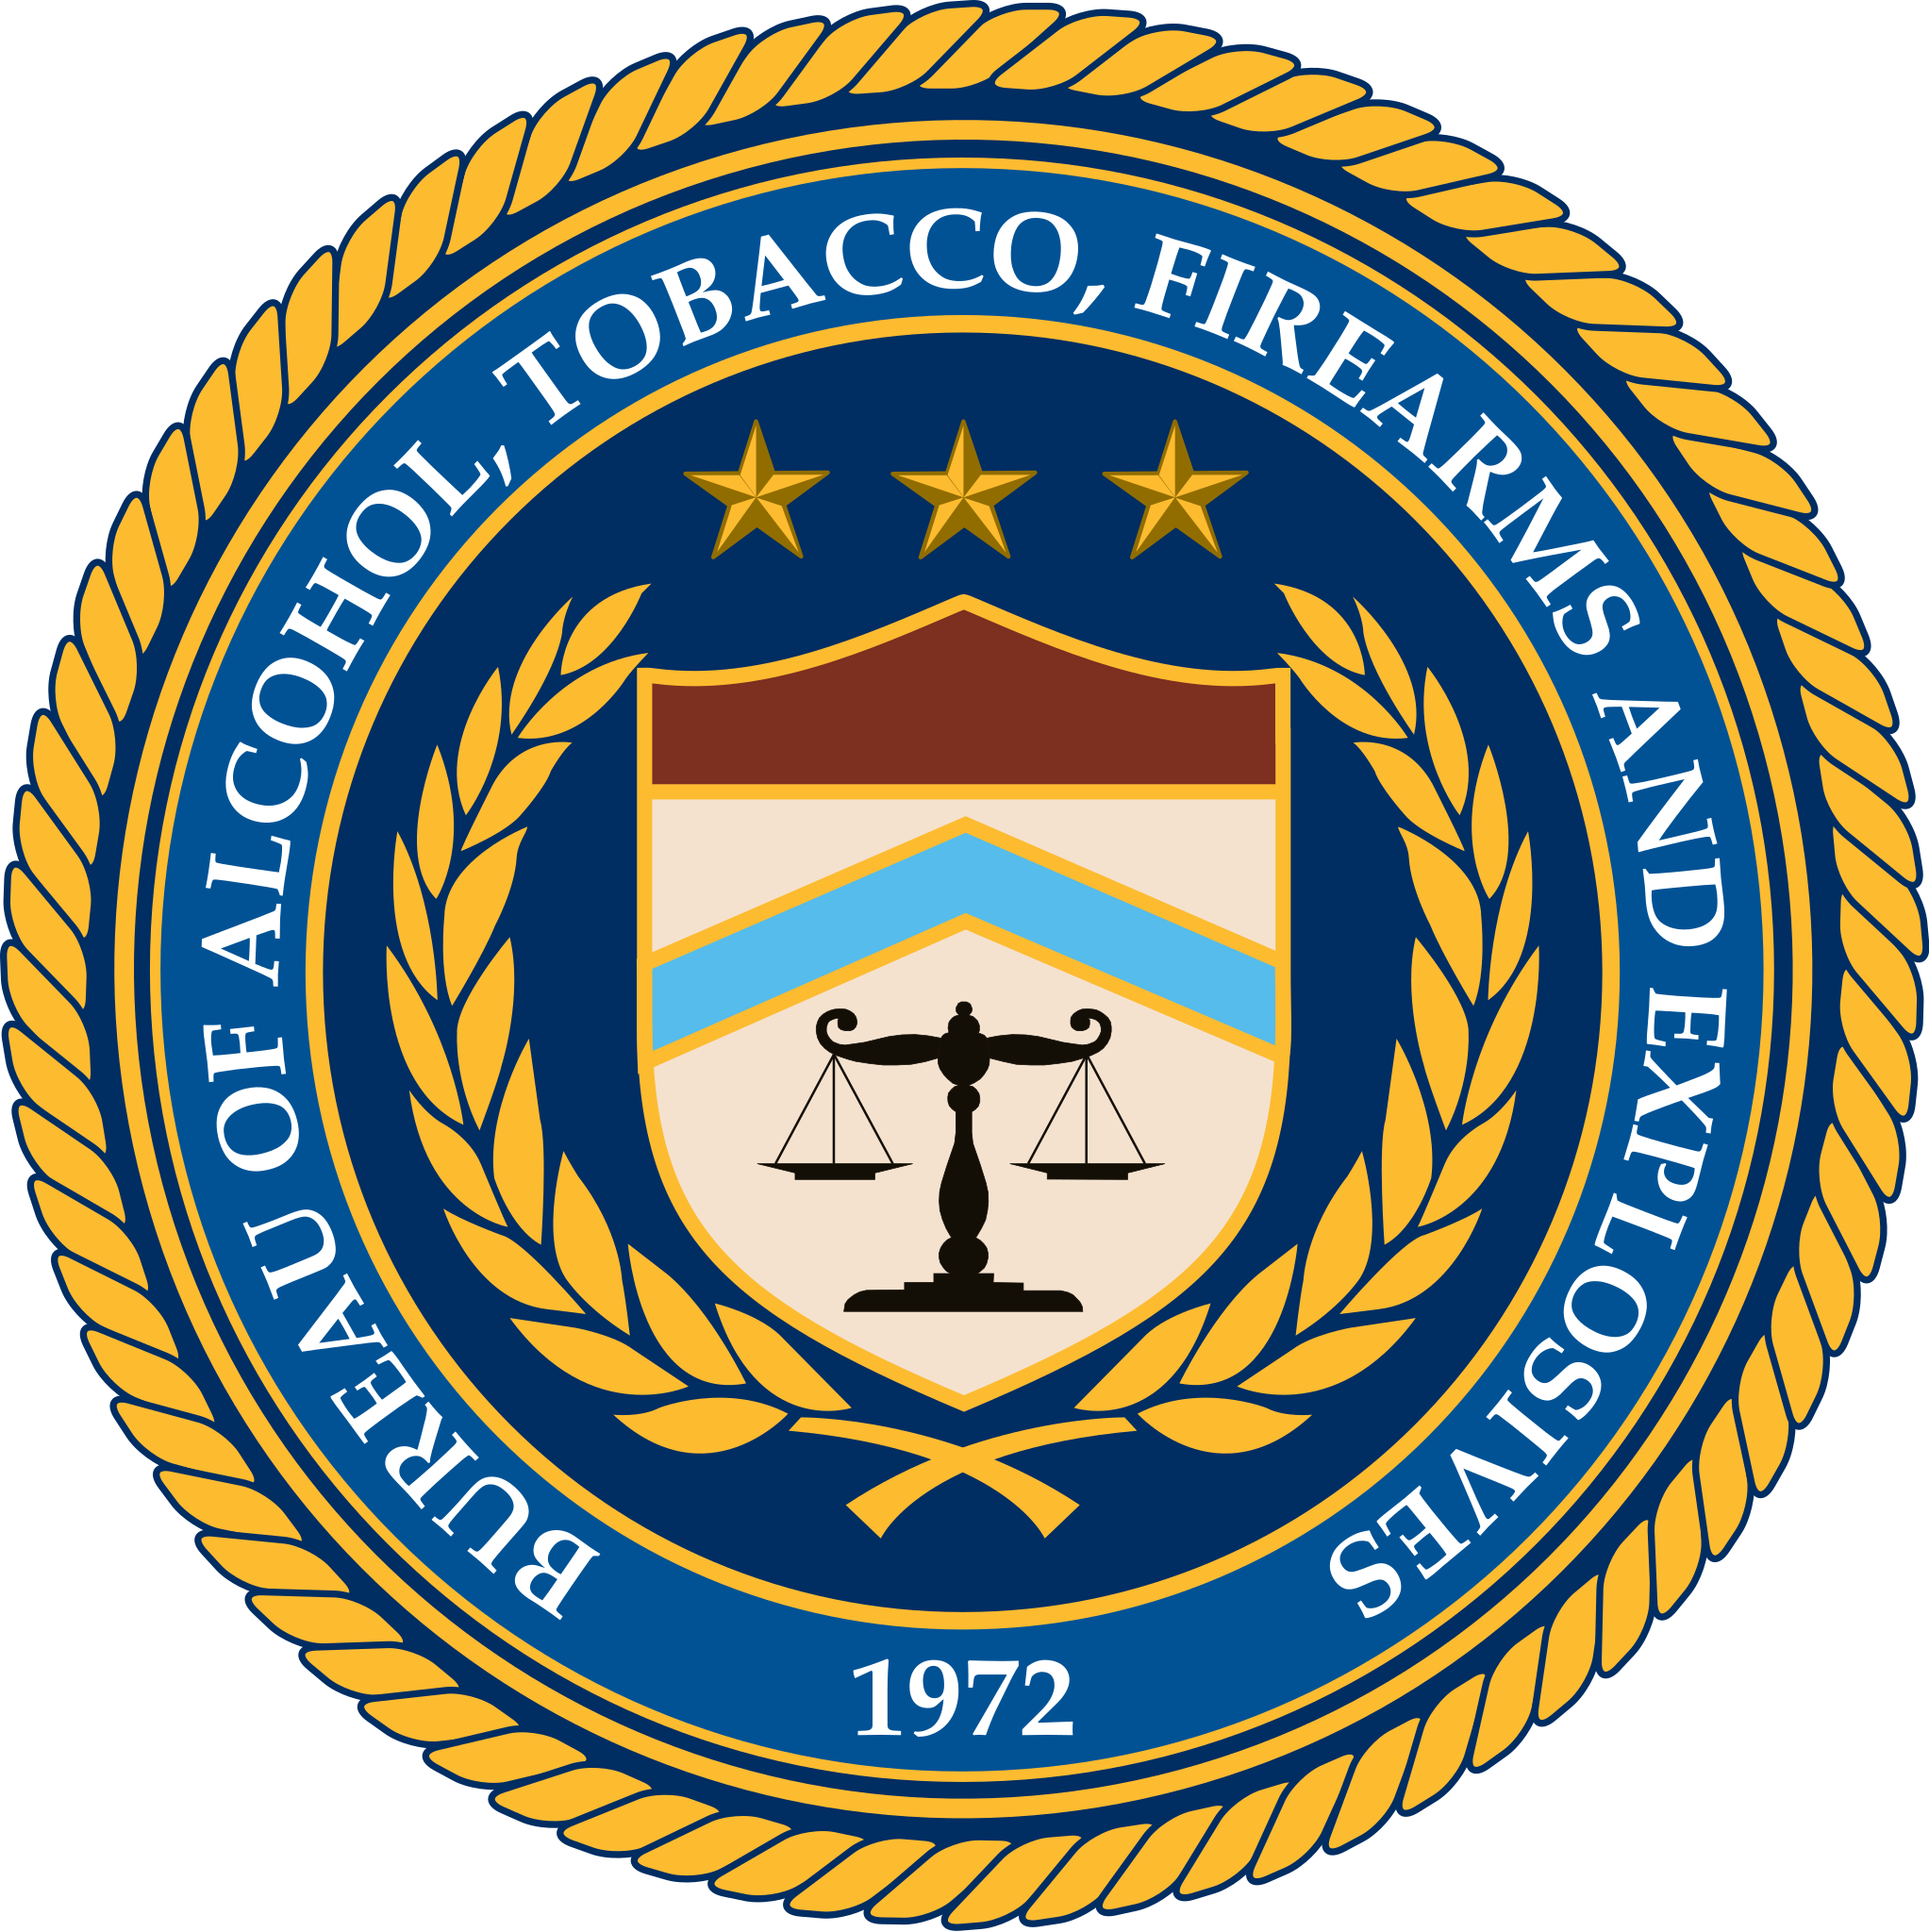 The Bureau of Alcohol, Tobacco, Firearms and Explosives